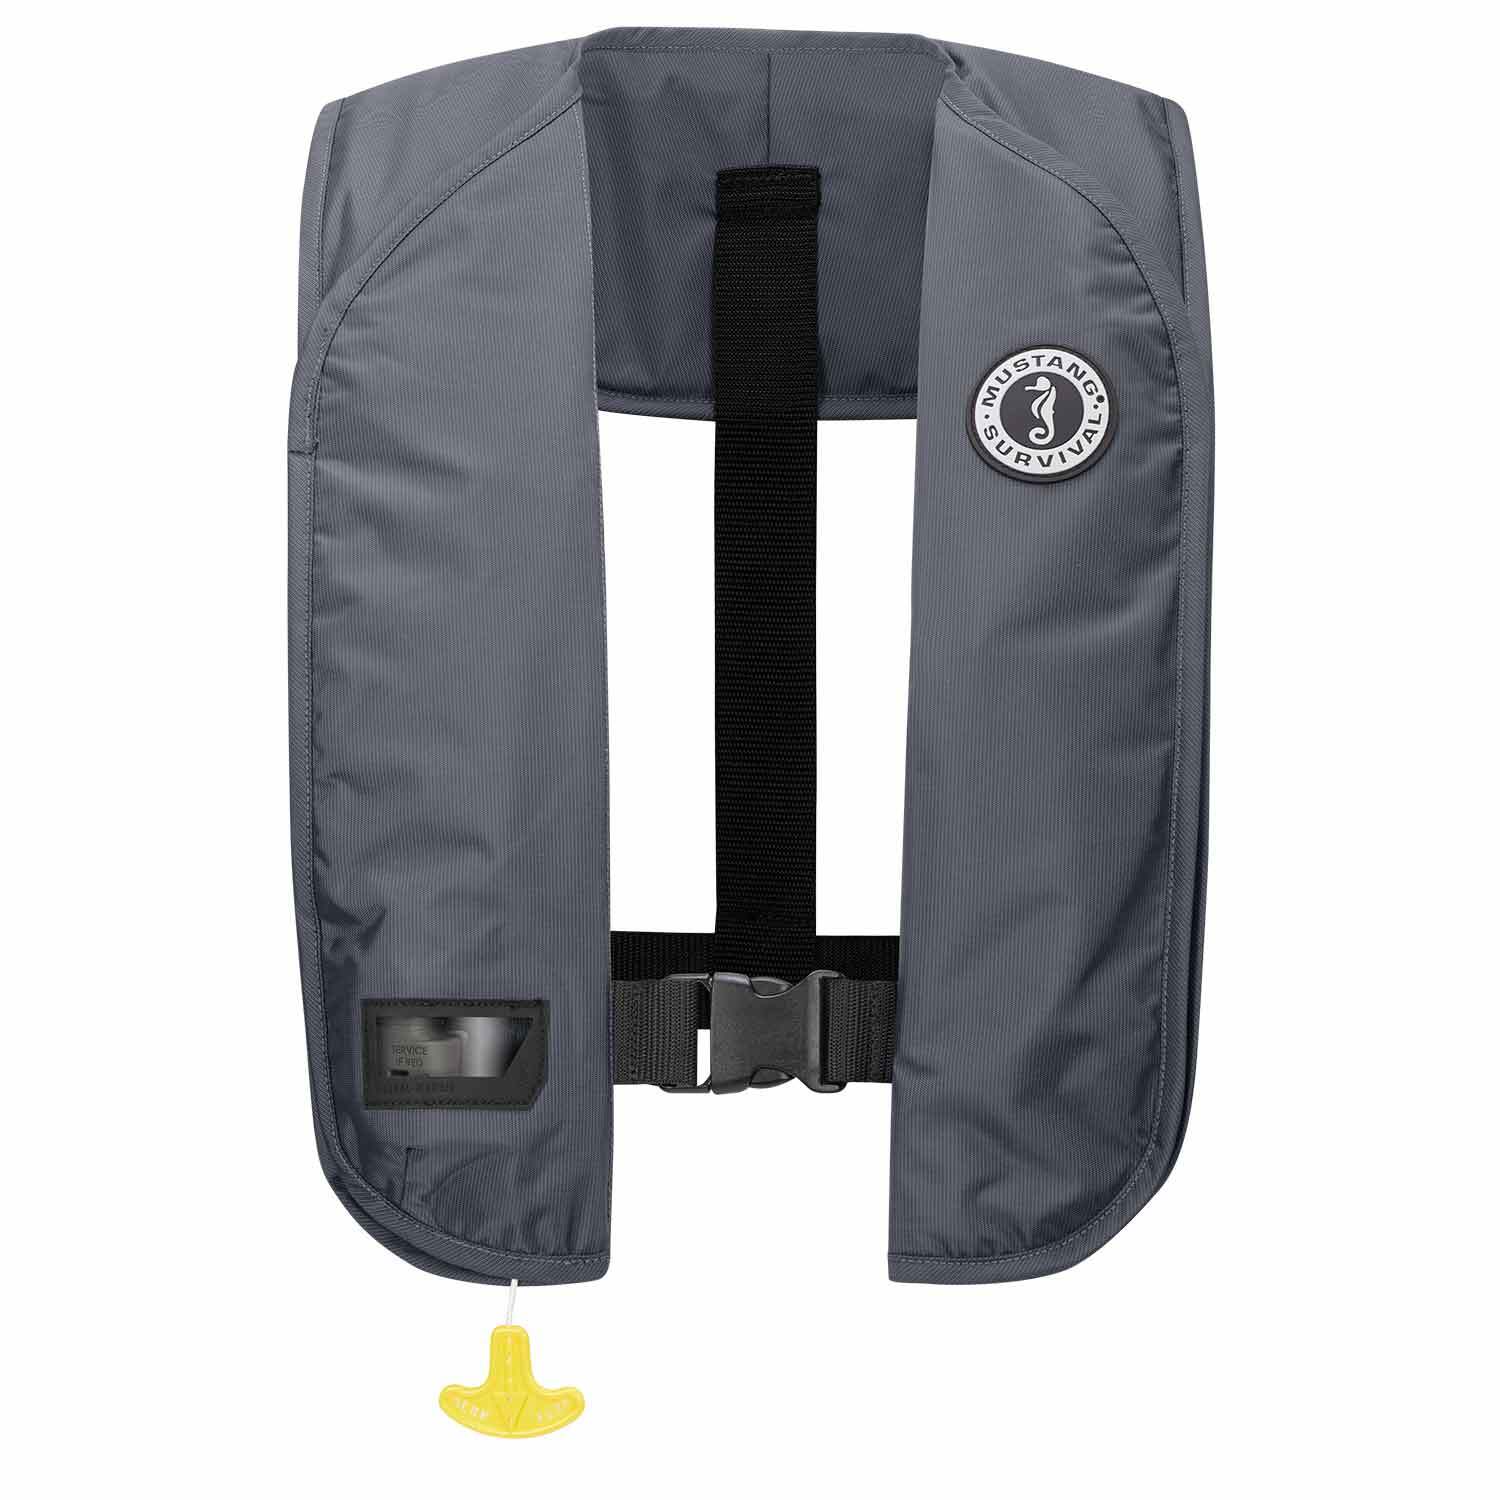 Mustang Survival MIT 100 Automatic Inflatable PFD Lifevest Gray 